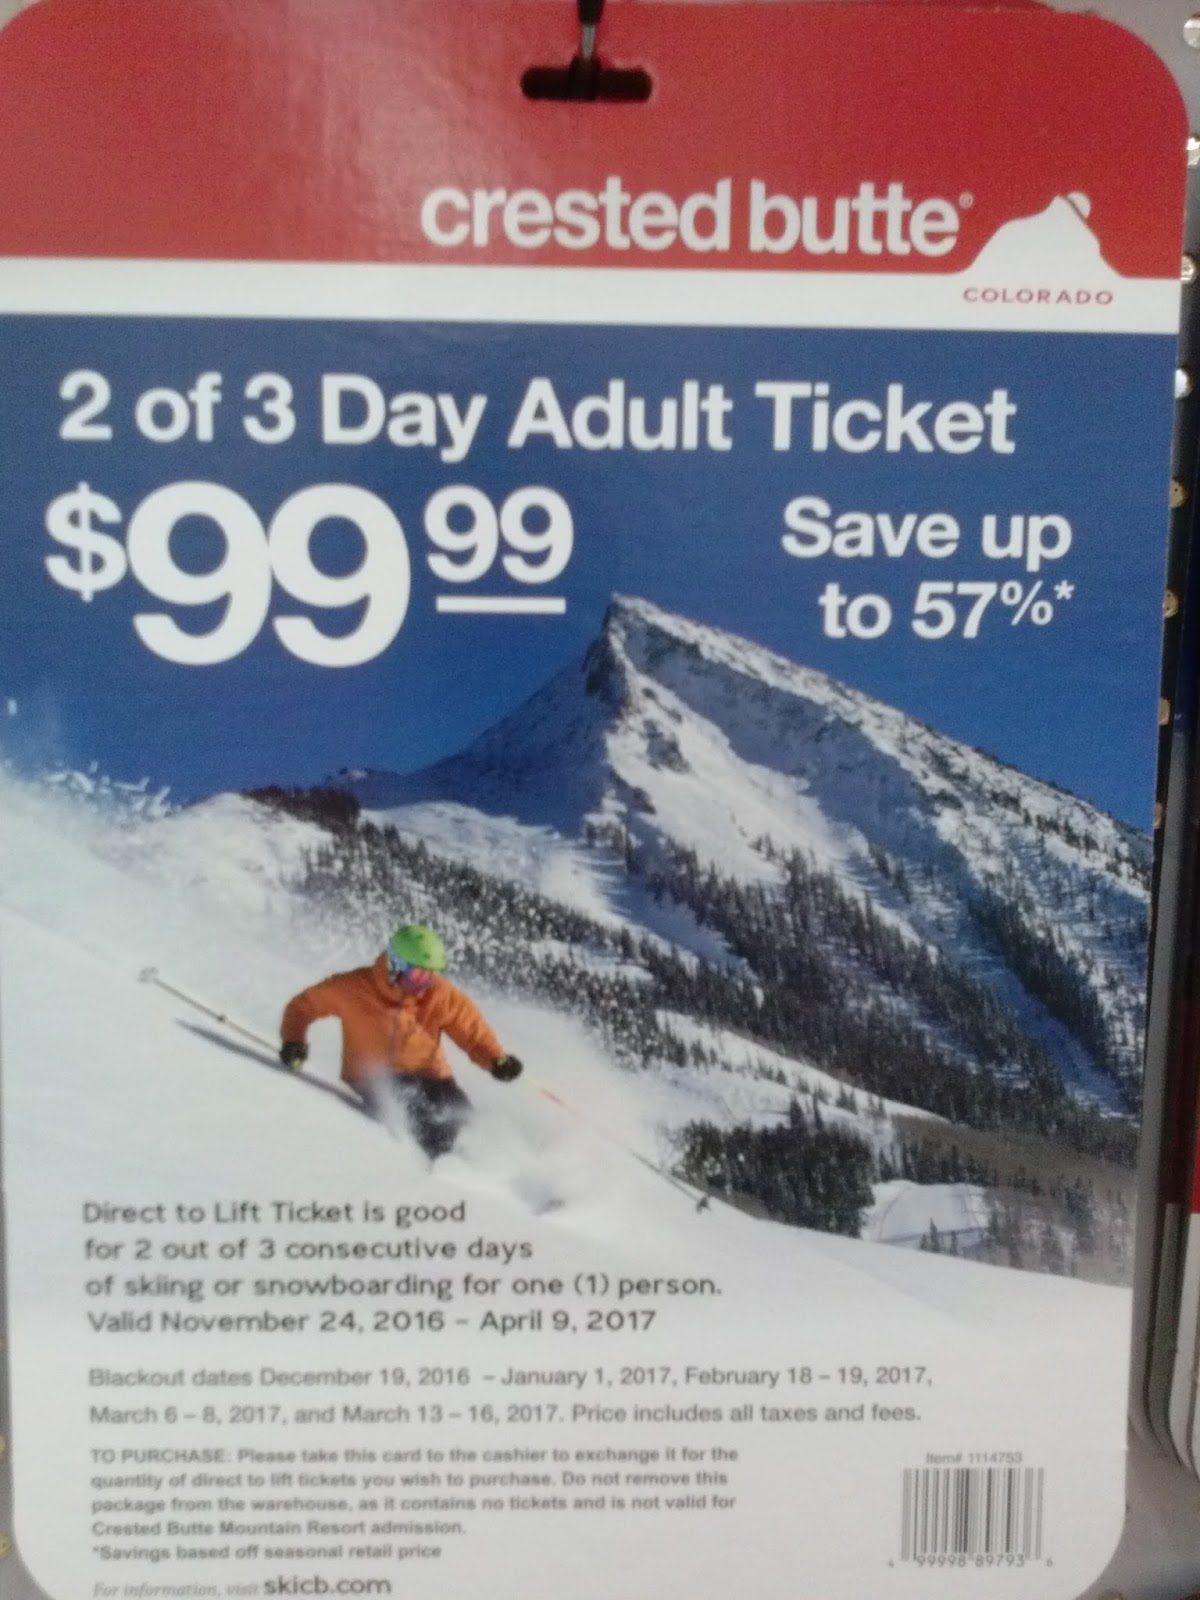 Crested E Lift Tickets Are Now Available In Costco At Least The Denver Metro Locations I Found Below Offer Thornton